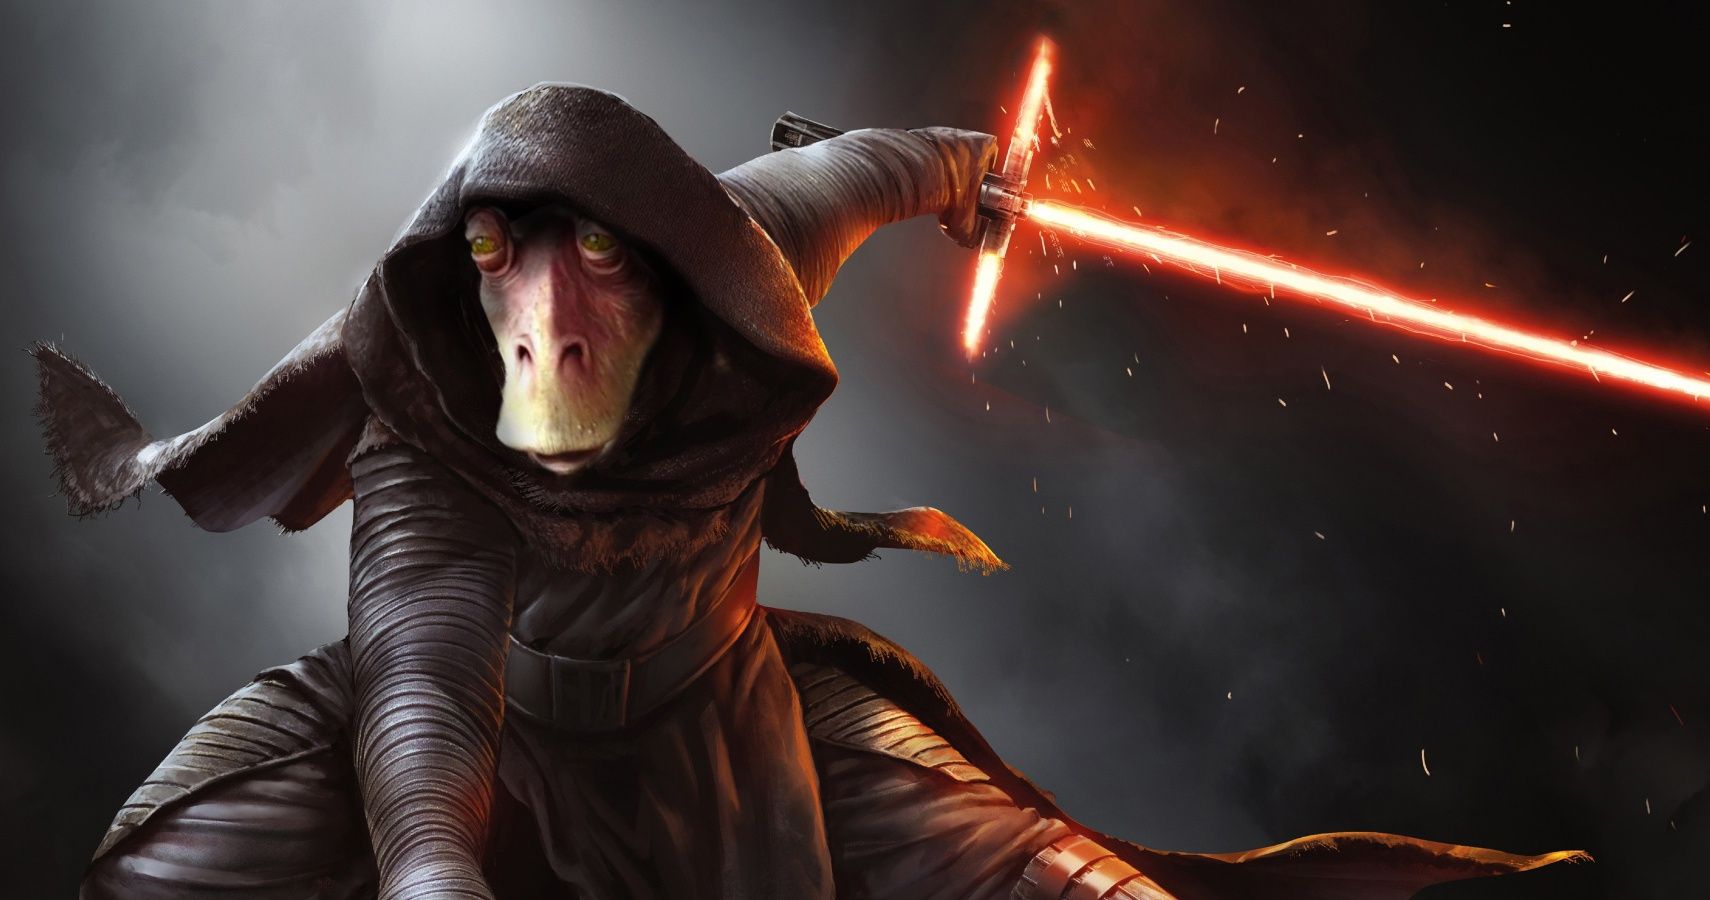 An edit of Jar Jar Binks as a Sith Lord in a huge cloak with a red crossguard lightsaber